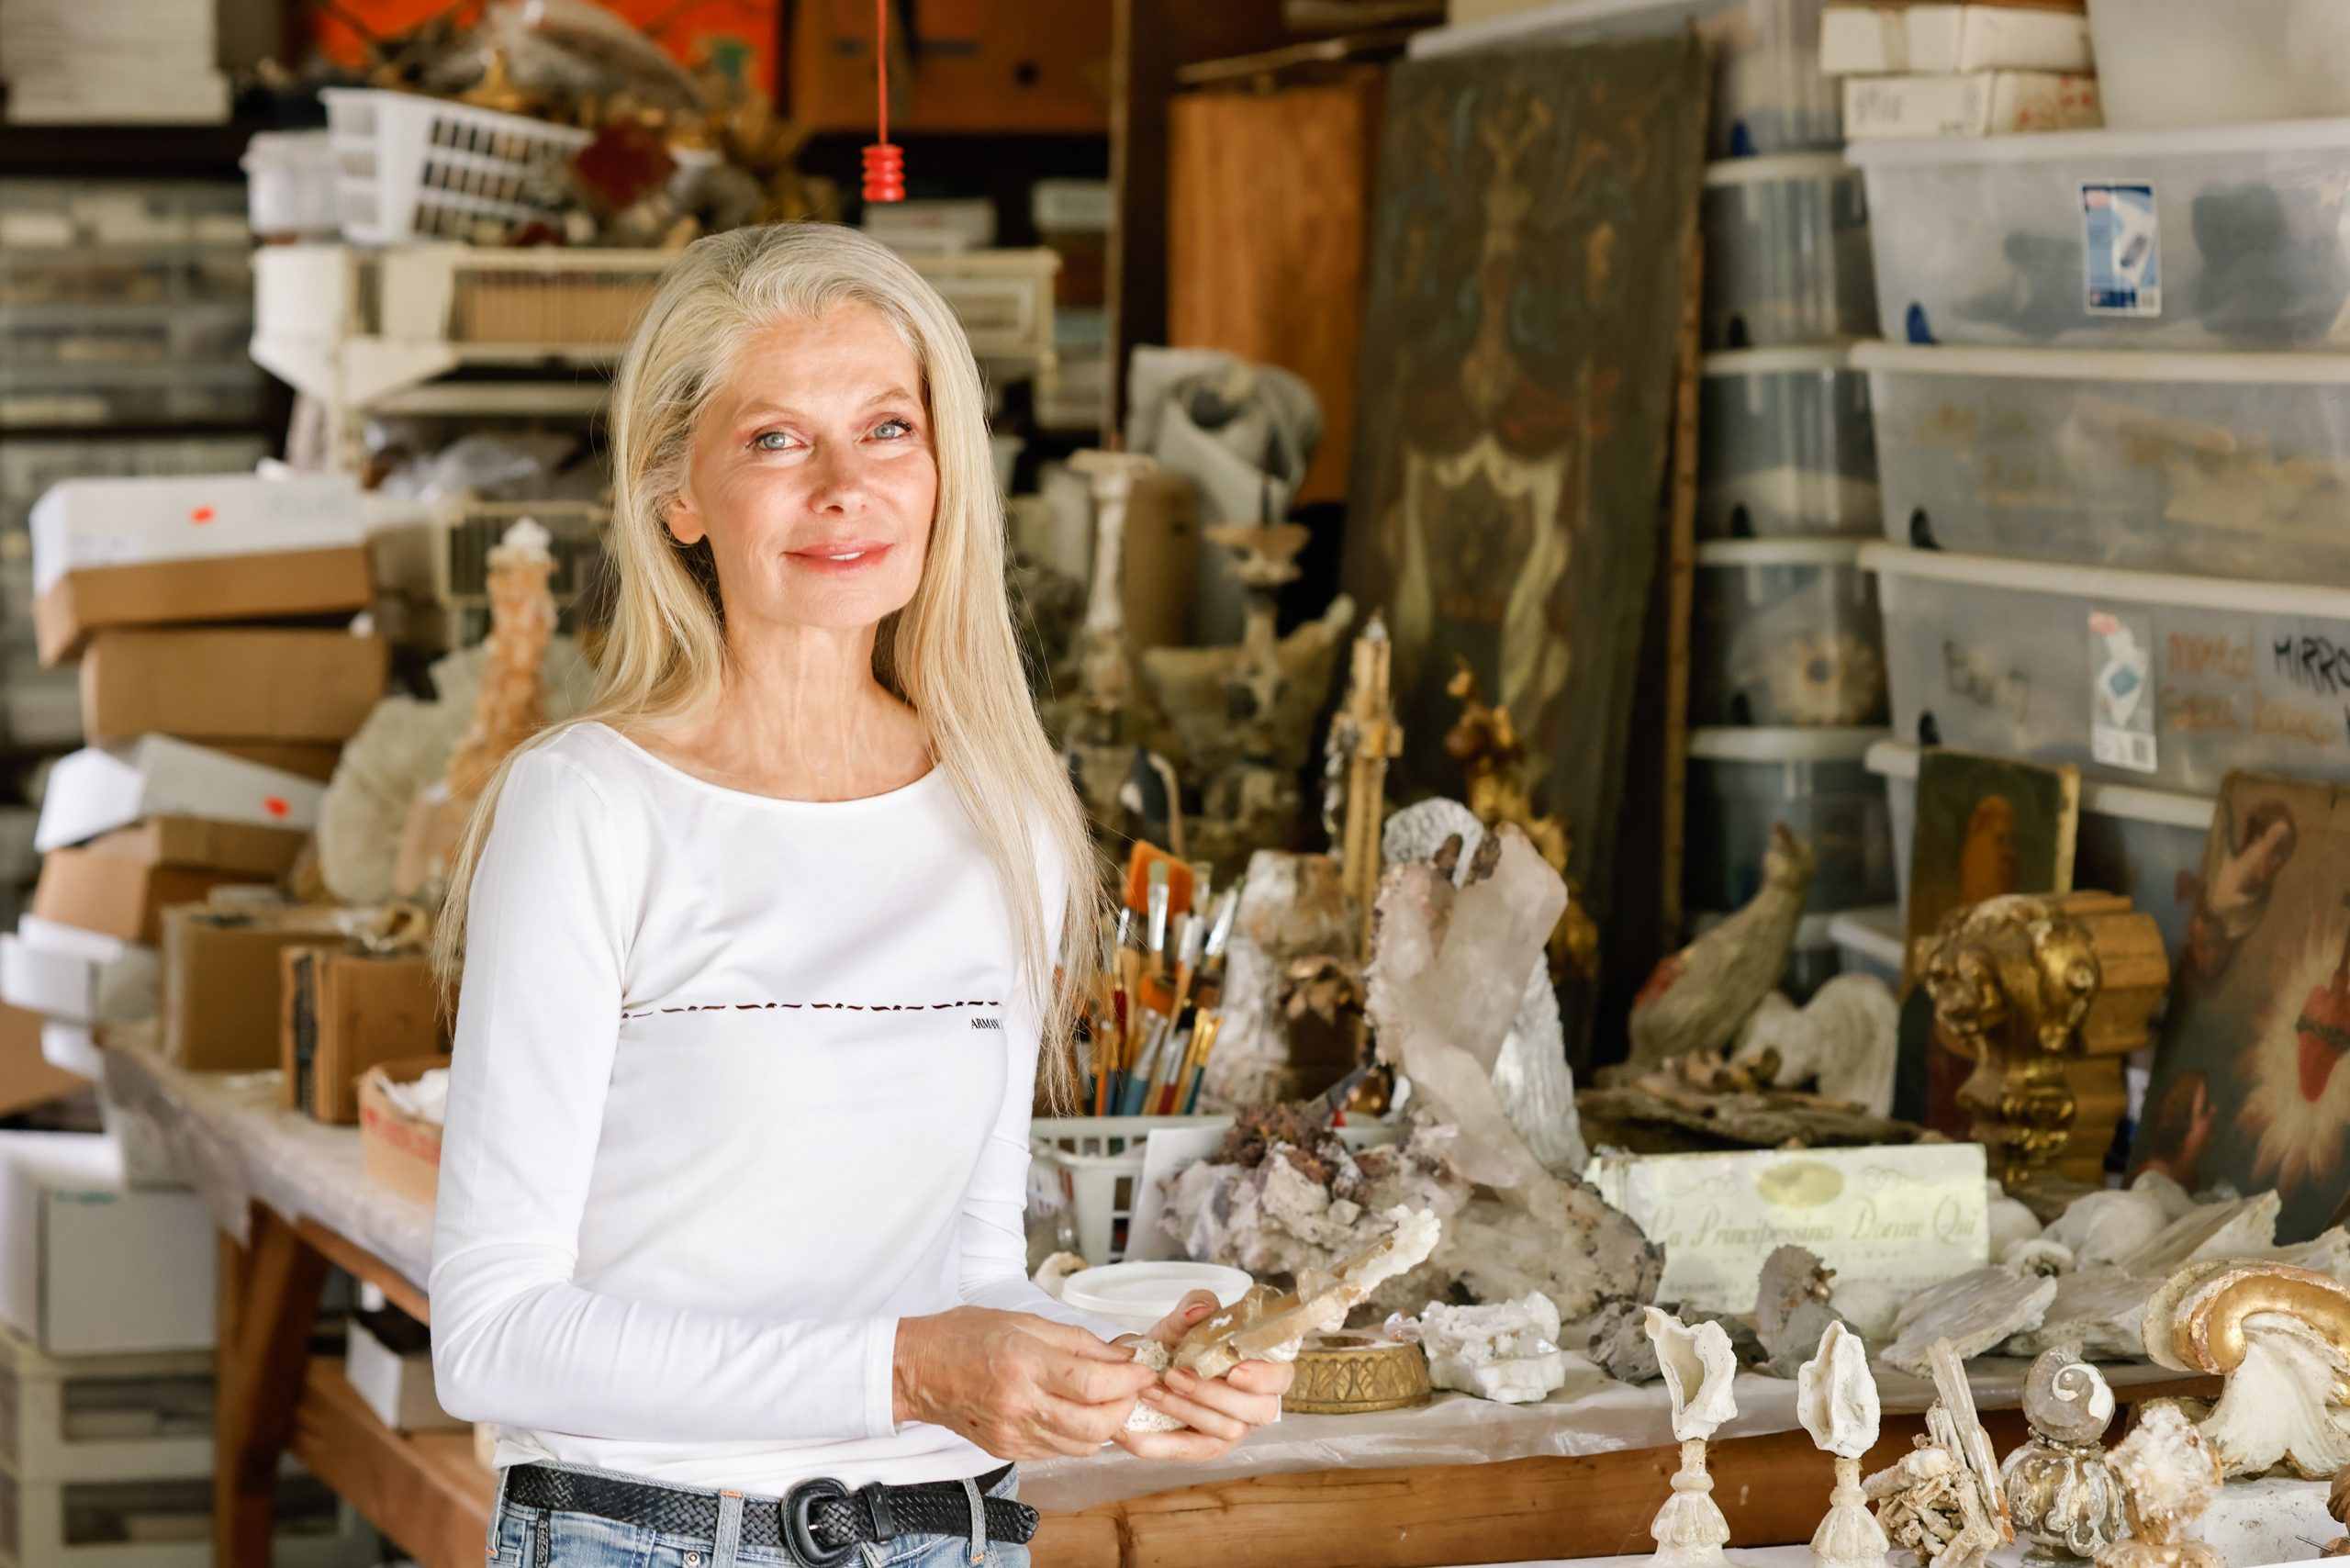 Jean’s studio is her garage; she likes to work outside in natural light. She turns piece after piece over in her hands, pointing out how crystals fill gaps in 300-year-old wood carvings, looking as if nature placed them there. 